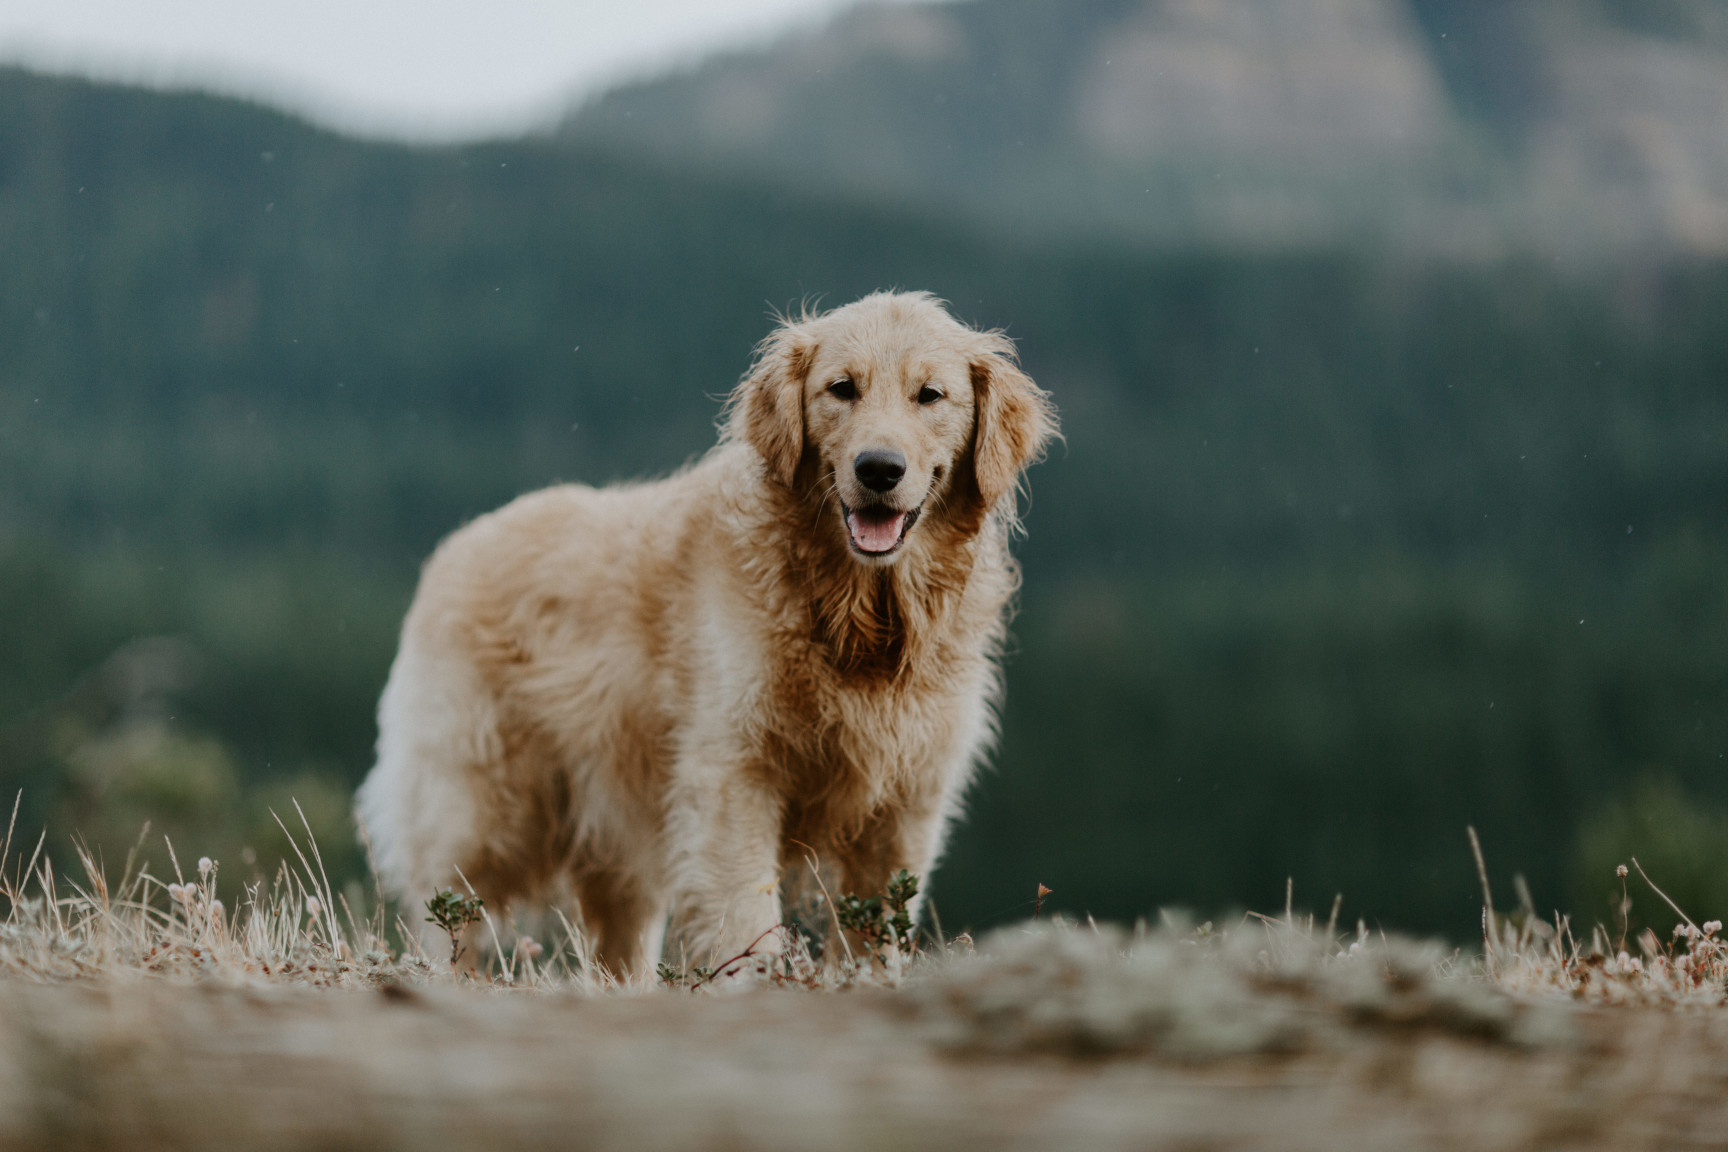 Cody the dog stops for a picture near Cascade Locks, OR. Elopement wedding photography at Cascade Locks by Sienna Plus Josh.